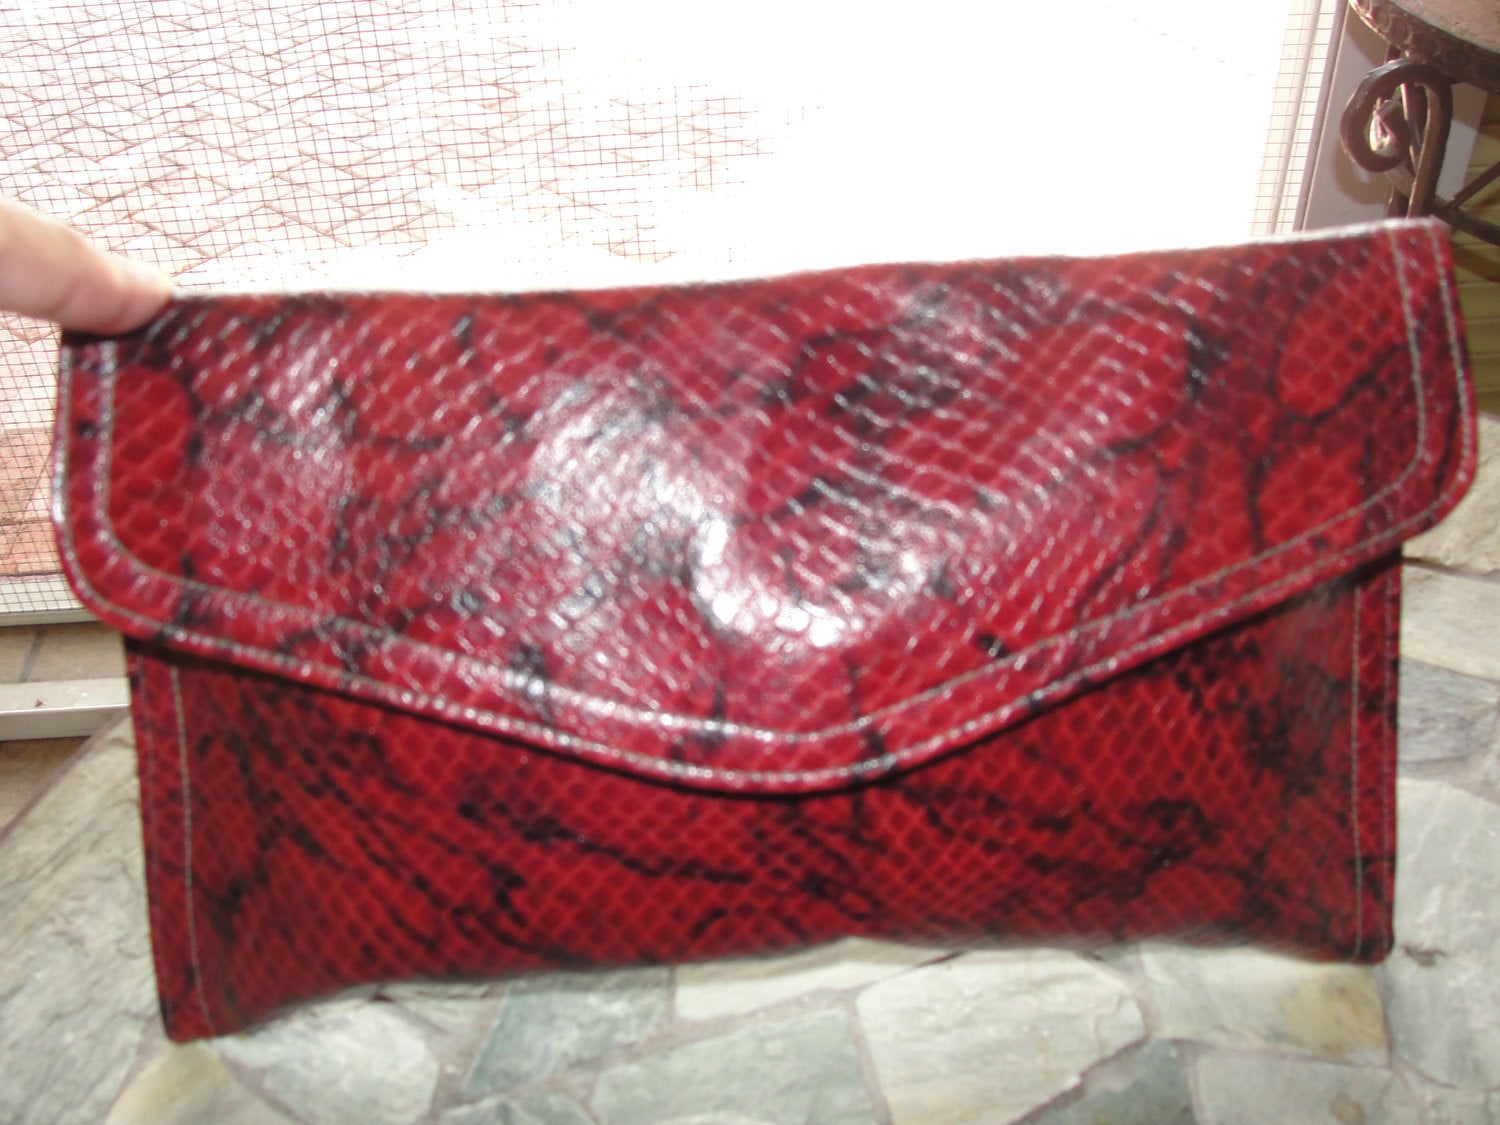 Red Leather Snakeskin Purse Clutch